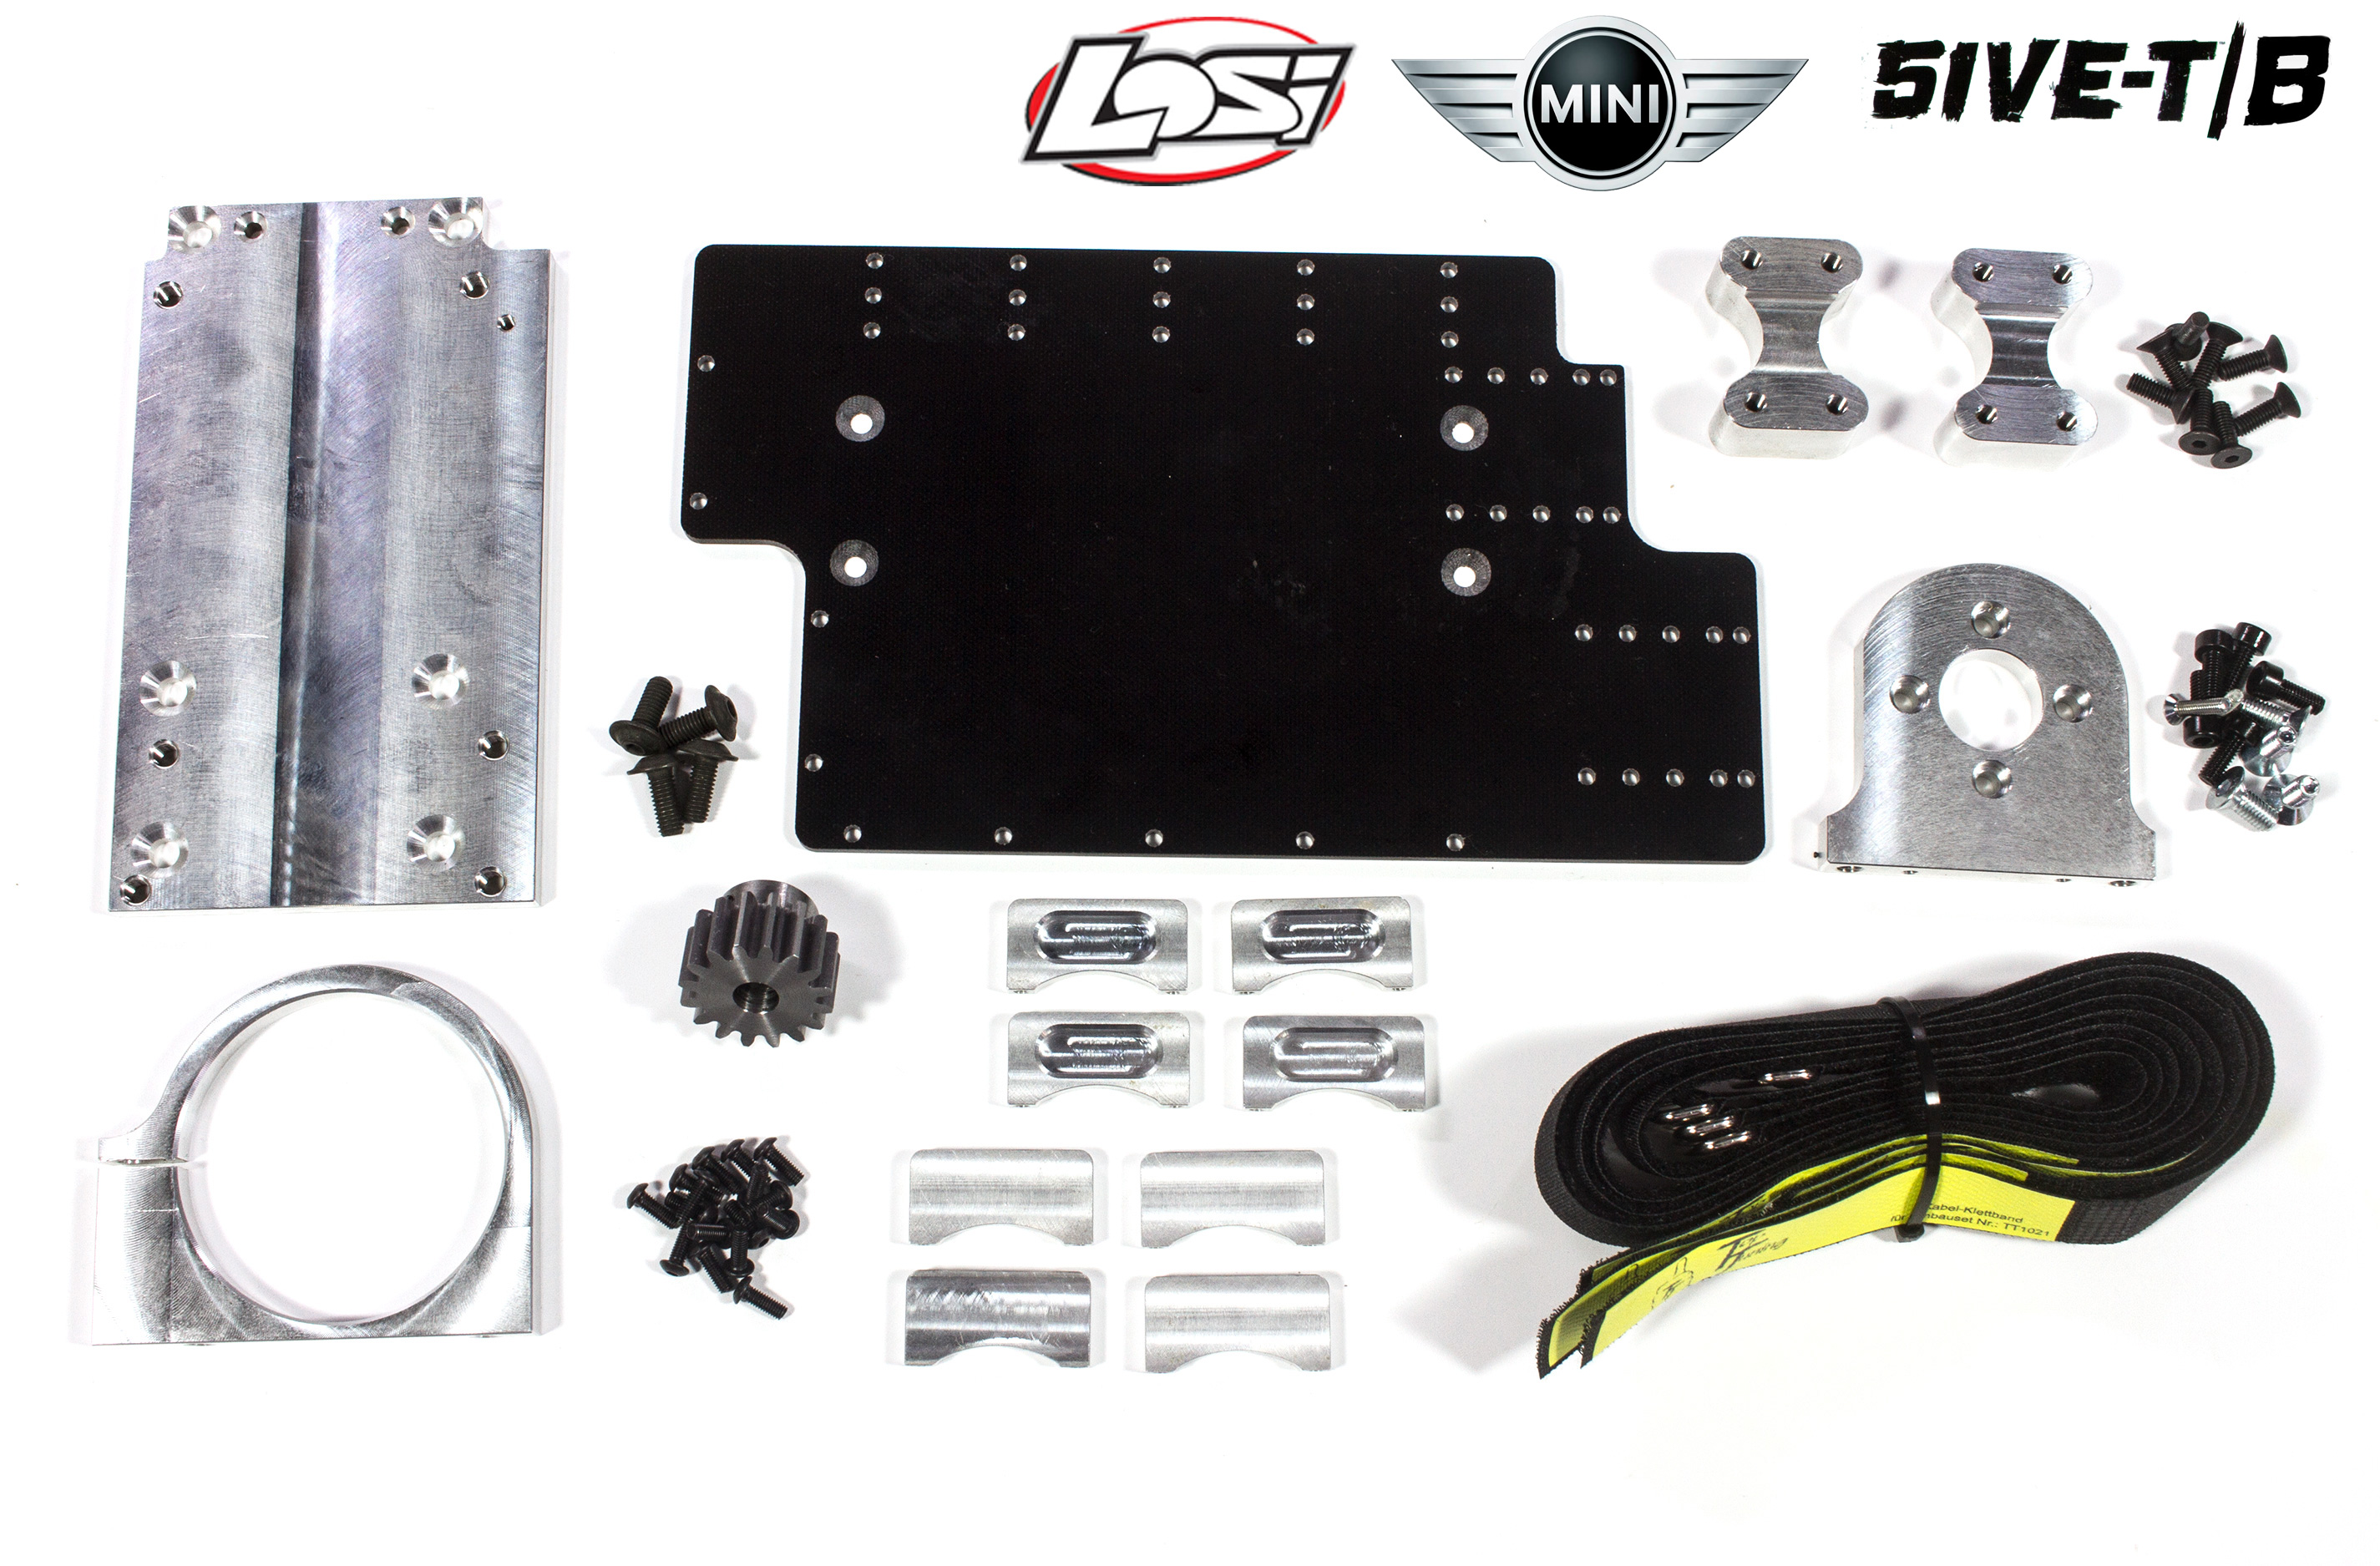 TT1021 Top Tuning Electric conversion kit for Losi 5ive-T/B and Mini